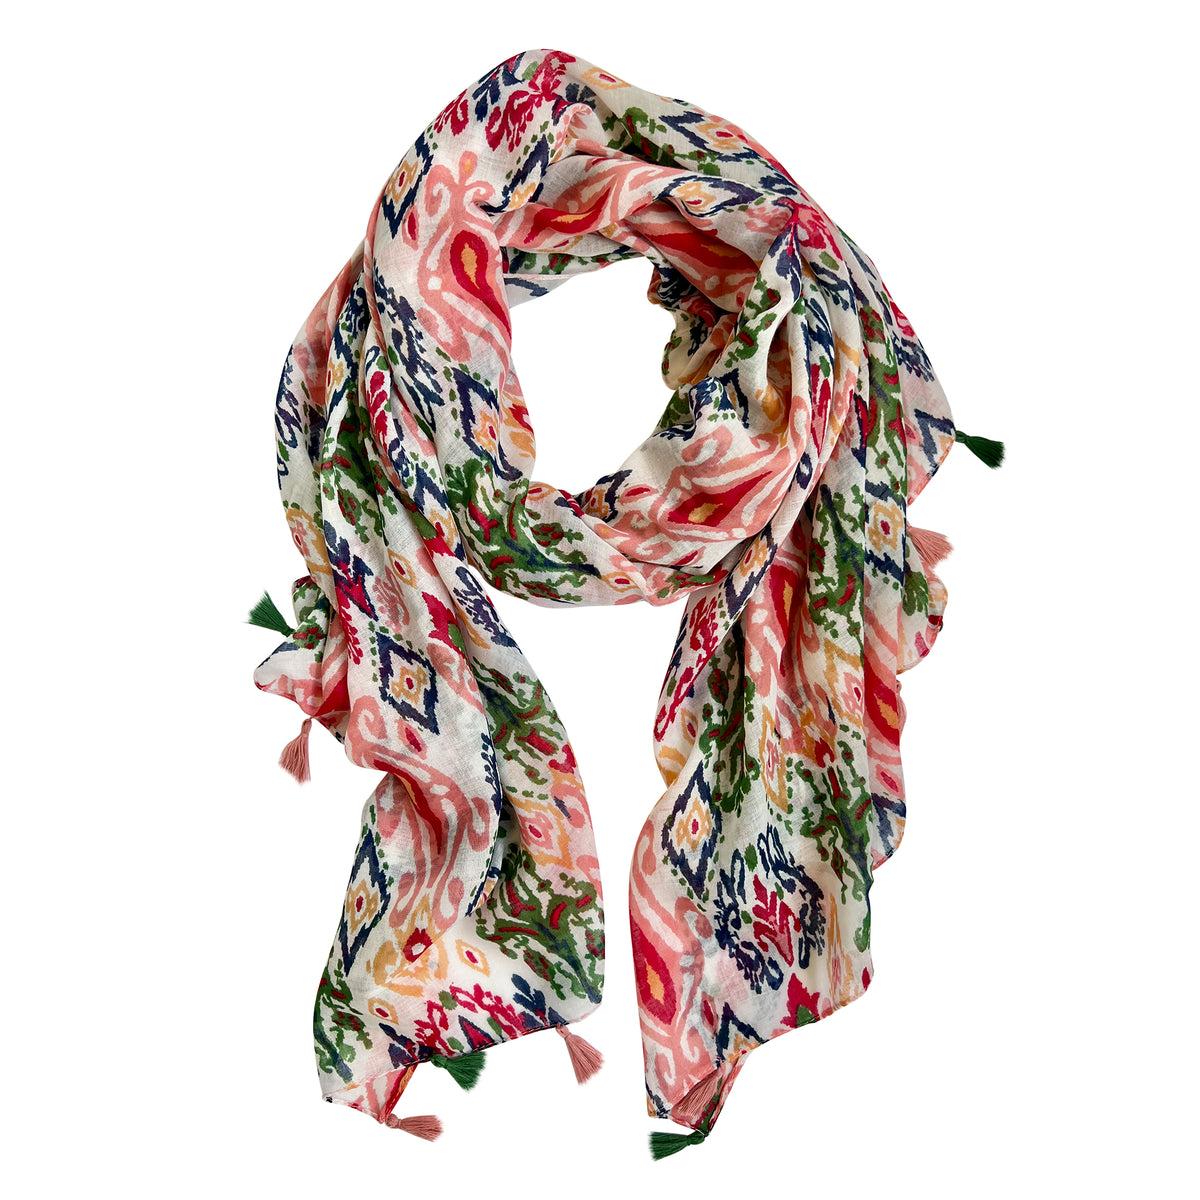 Enhance your style with our bold Moroccan-inspired print scarf, featuring vibrant colors of green, pink, blue, and a dash of yellow for a unique and striking design. The playful pink and green tassels at the ends add a charming finishing touch, making this scarf a perfect and lively addition to any wardrobe.